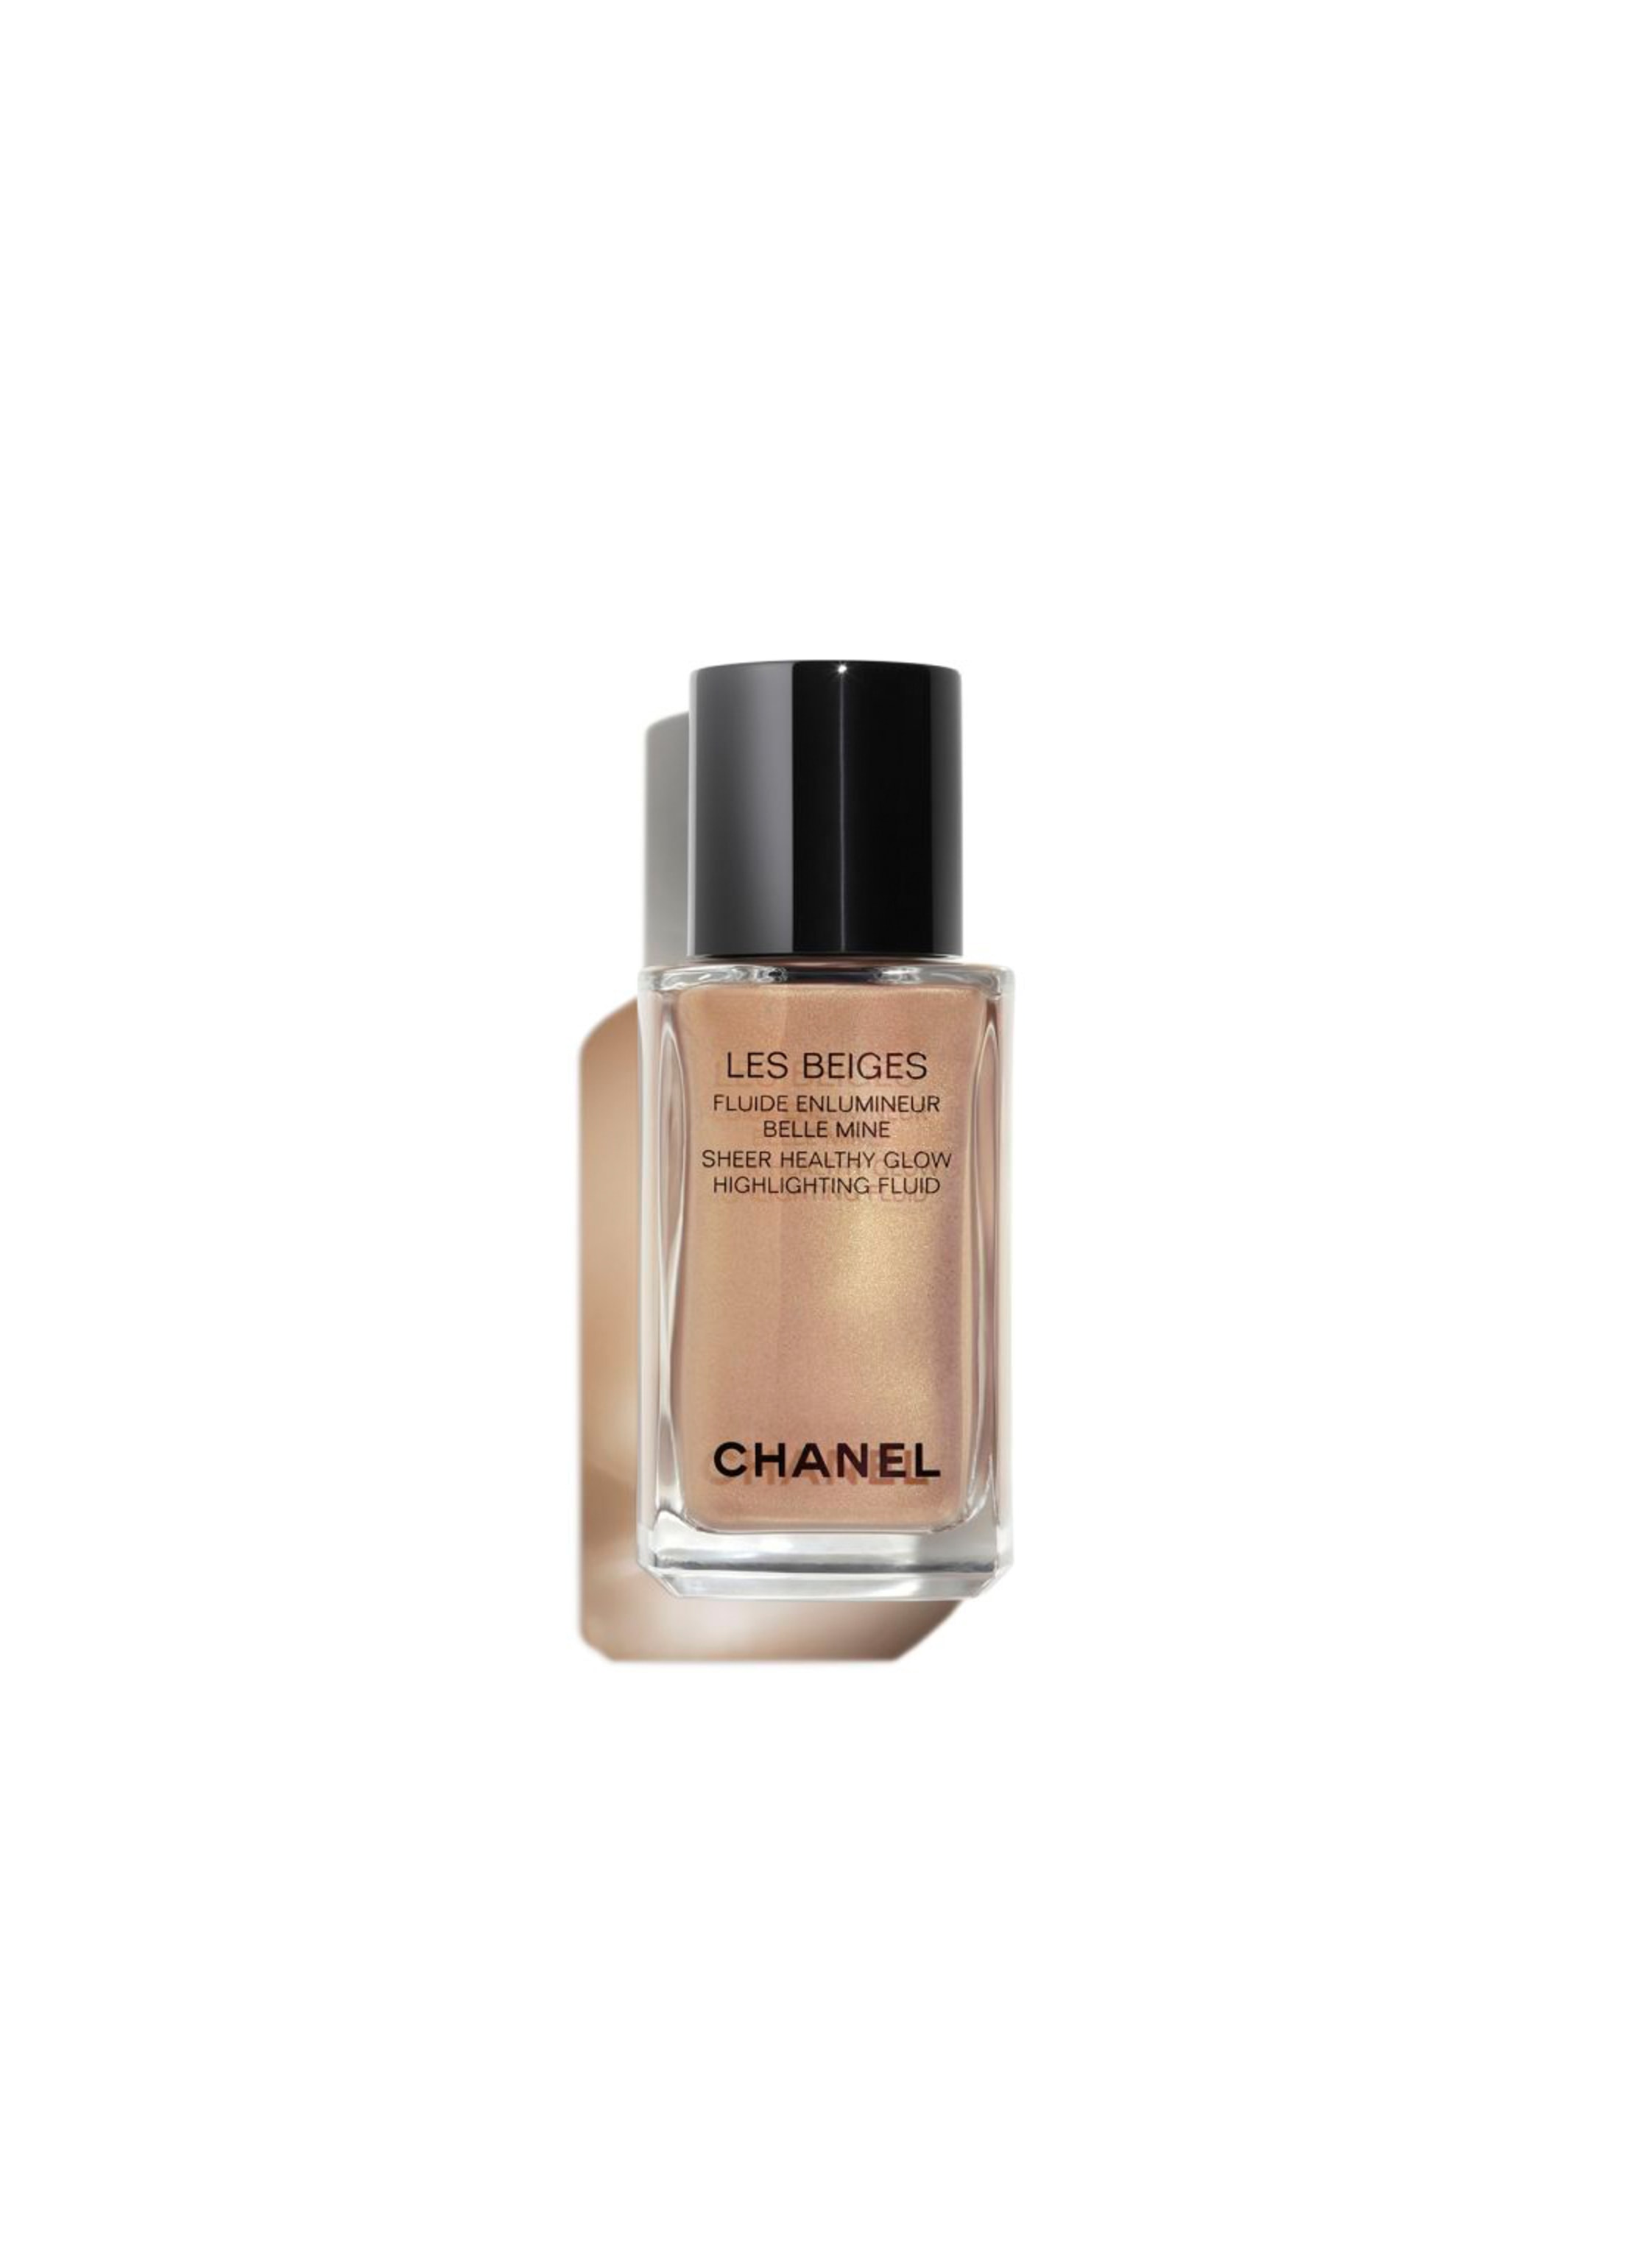 CHANEL, Makeup, Chanel Les Beiges Sheer Healthy Glow Highlighting Fluid